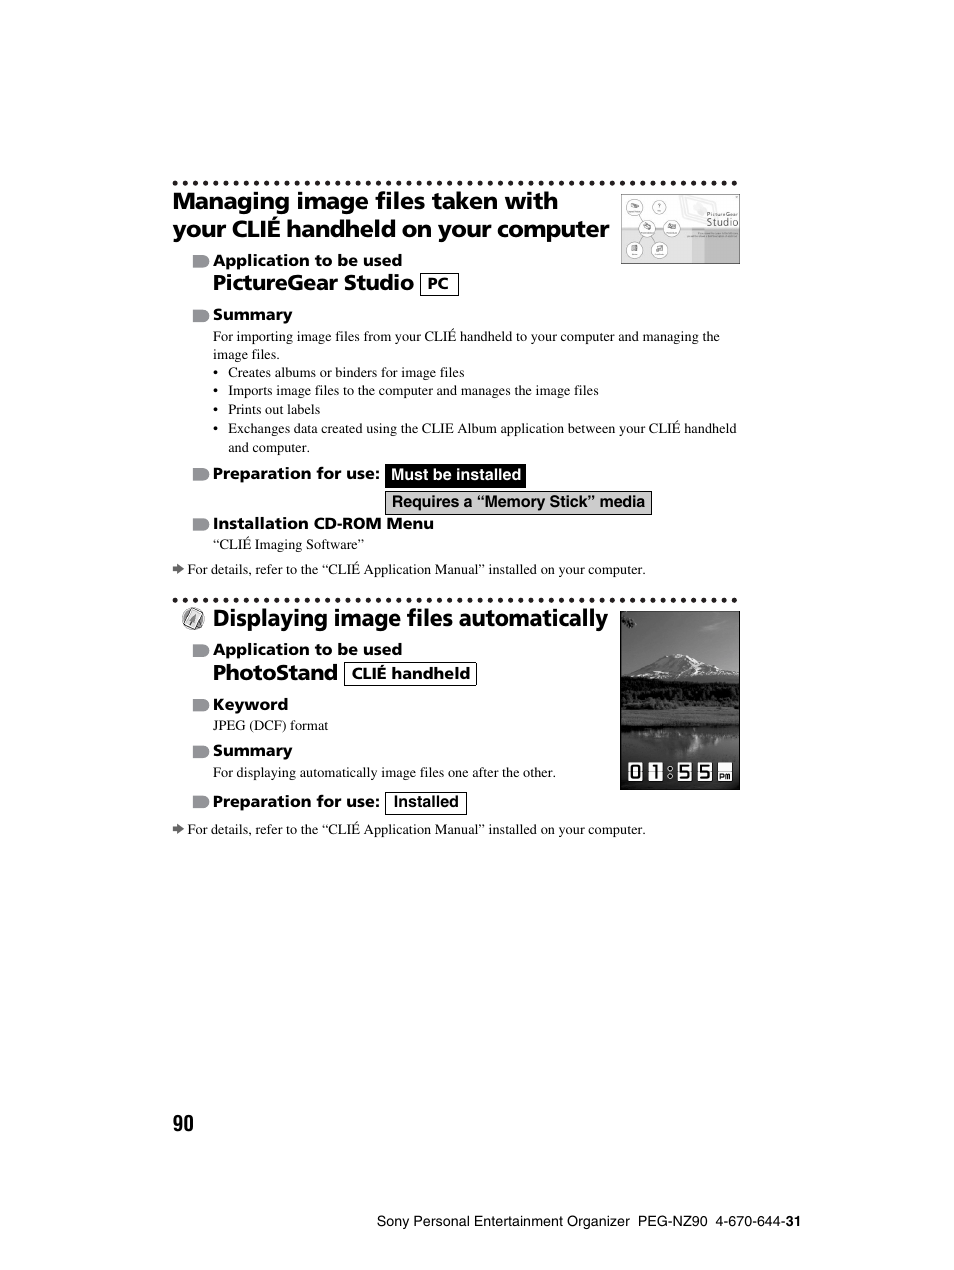 Displaying image files automatically, Picturegear studio, Photostand | Sony PEG-NZ90 User Manual | Page 90 / 115